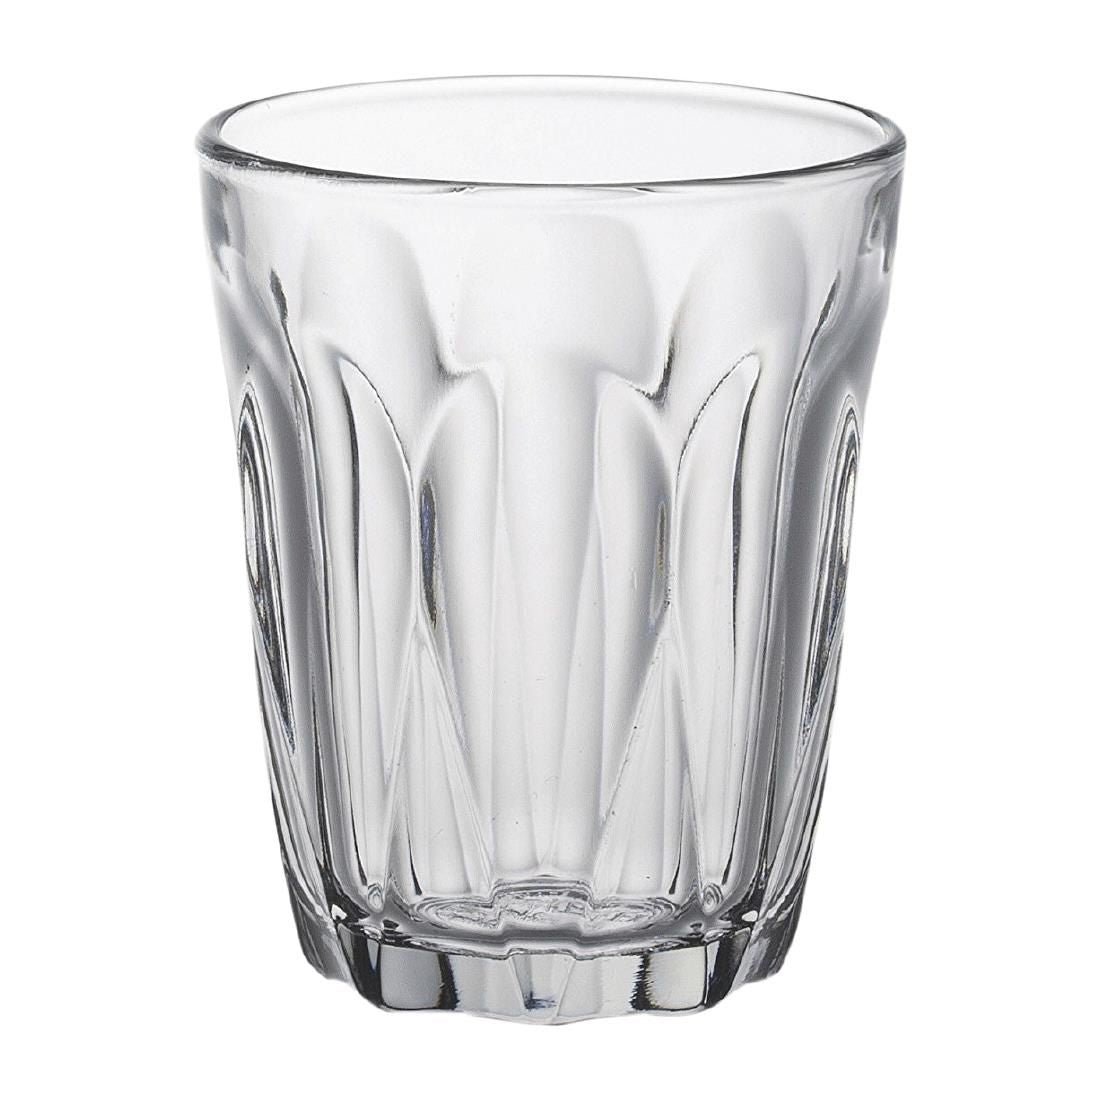 Duralex Provence Tumblers 90ml (Pack of 6) JD Catering Equipment Solutions Ltd